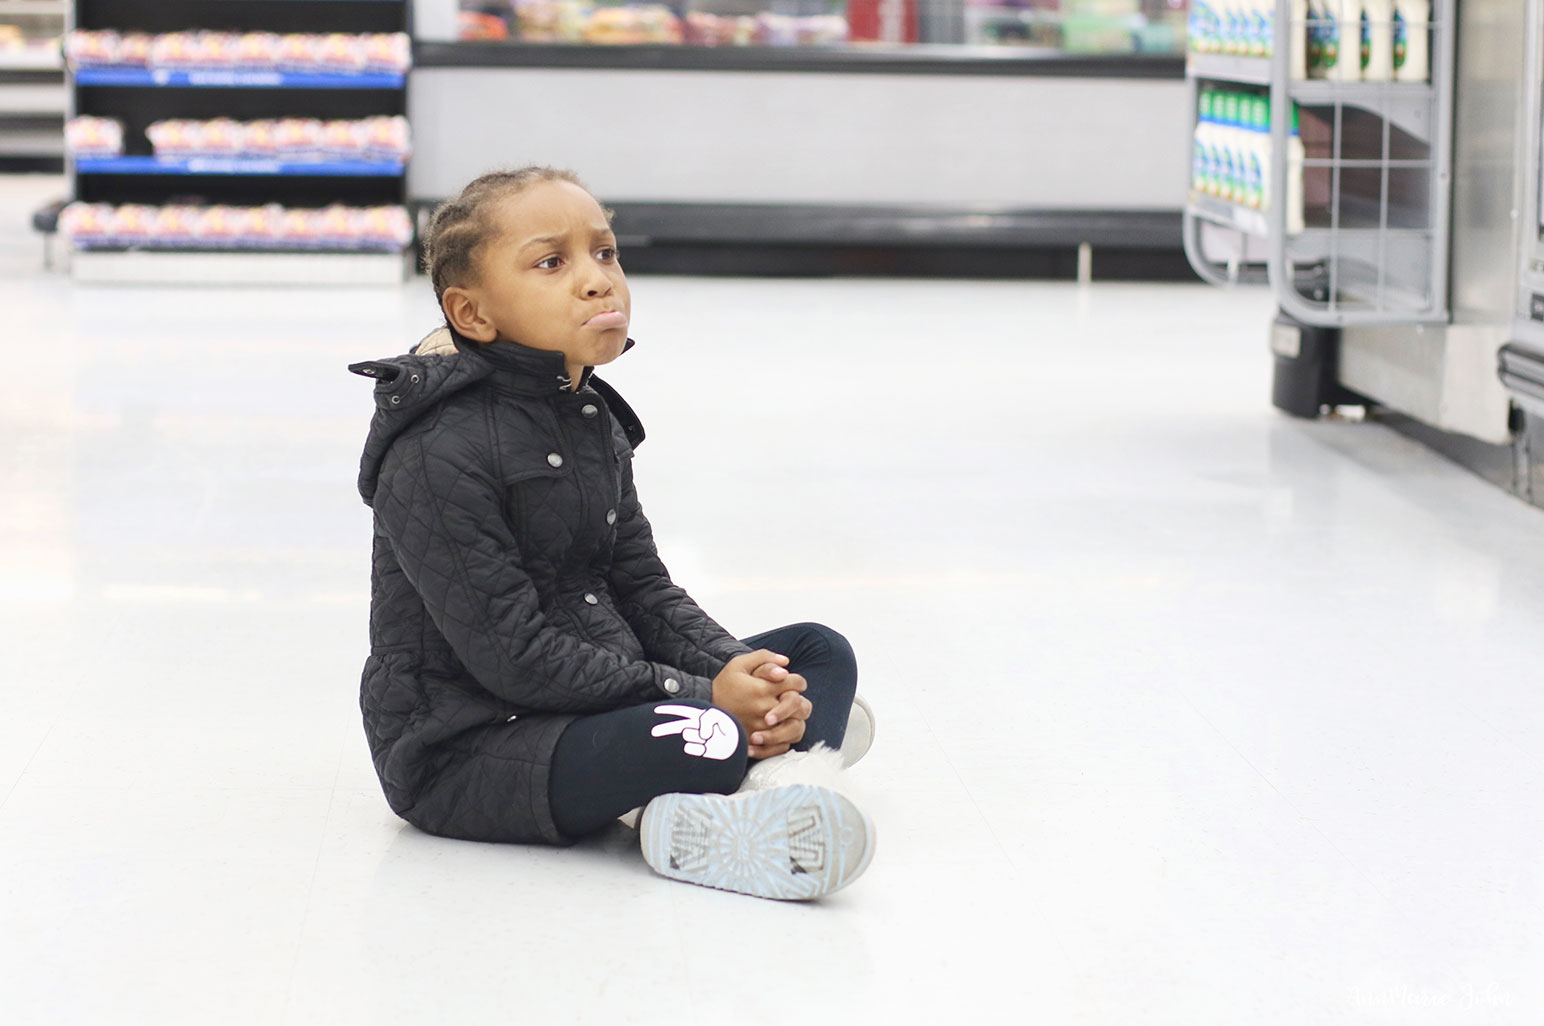 How to Avoid Embarrassing Meltdowns at the Grocery Store ~ #GroceryHero